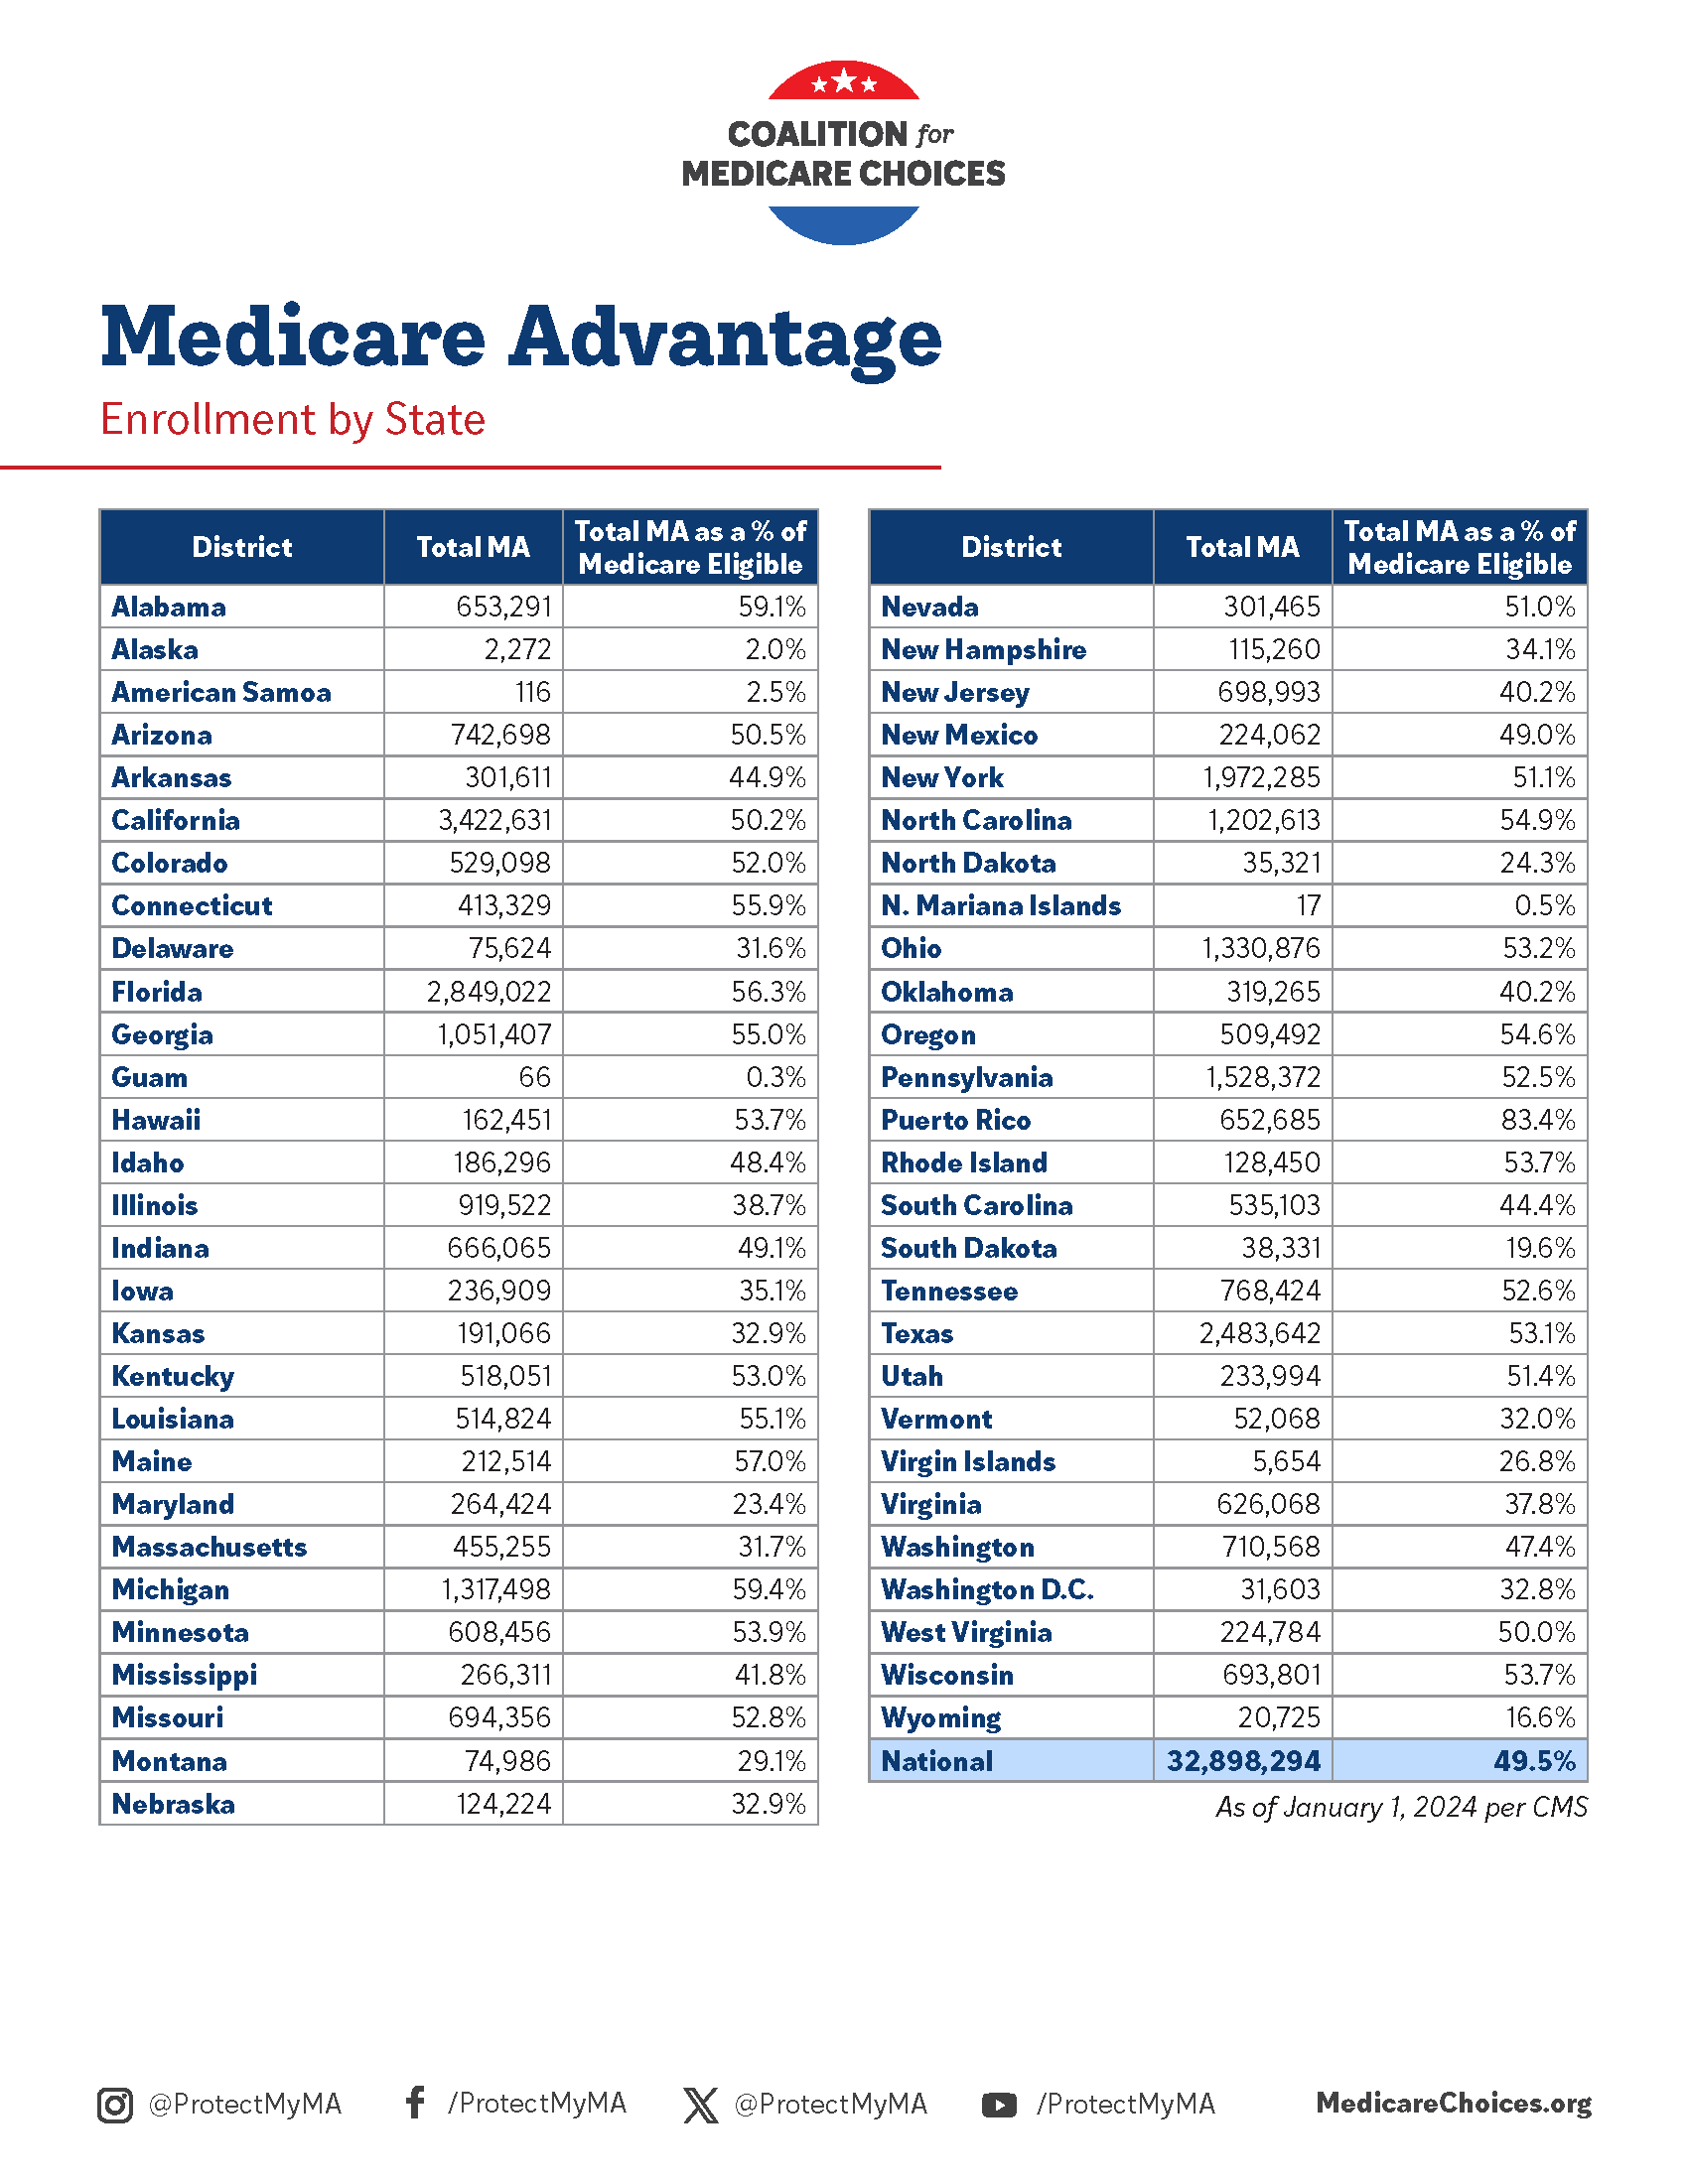 Chart with Medicare Advantage enrollment numbers by state